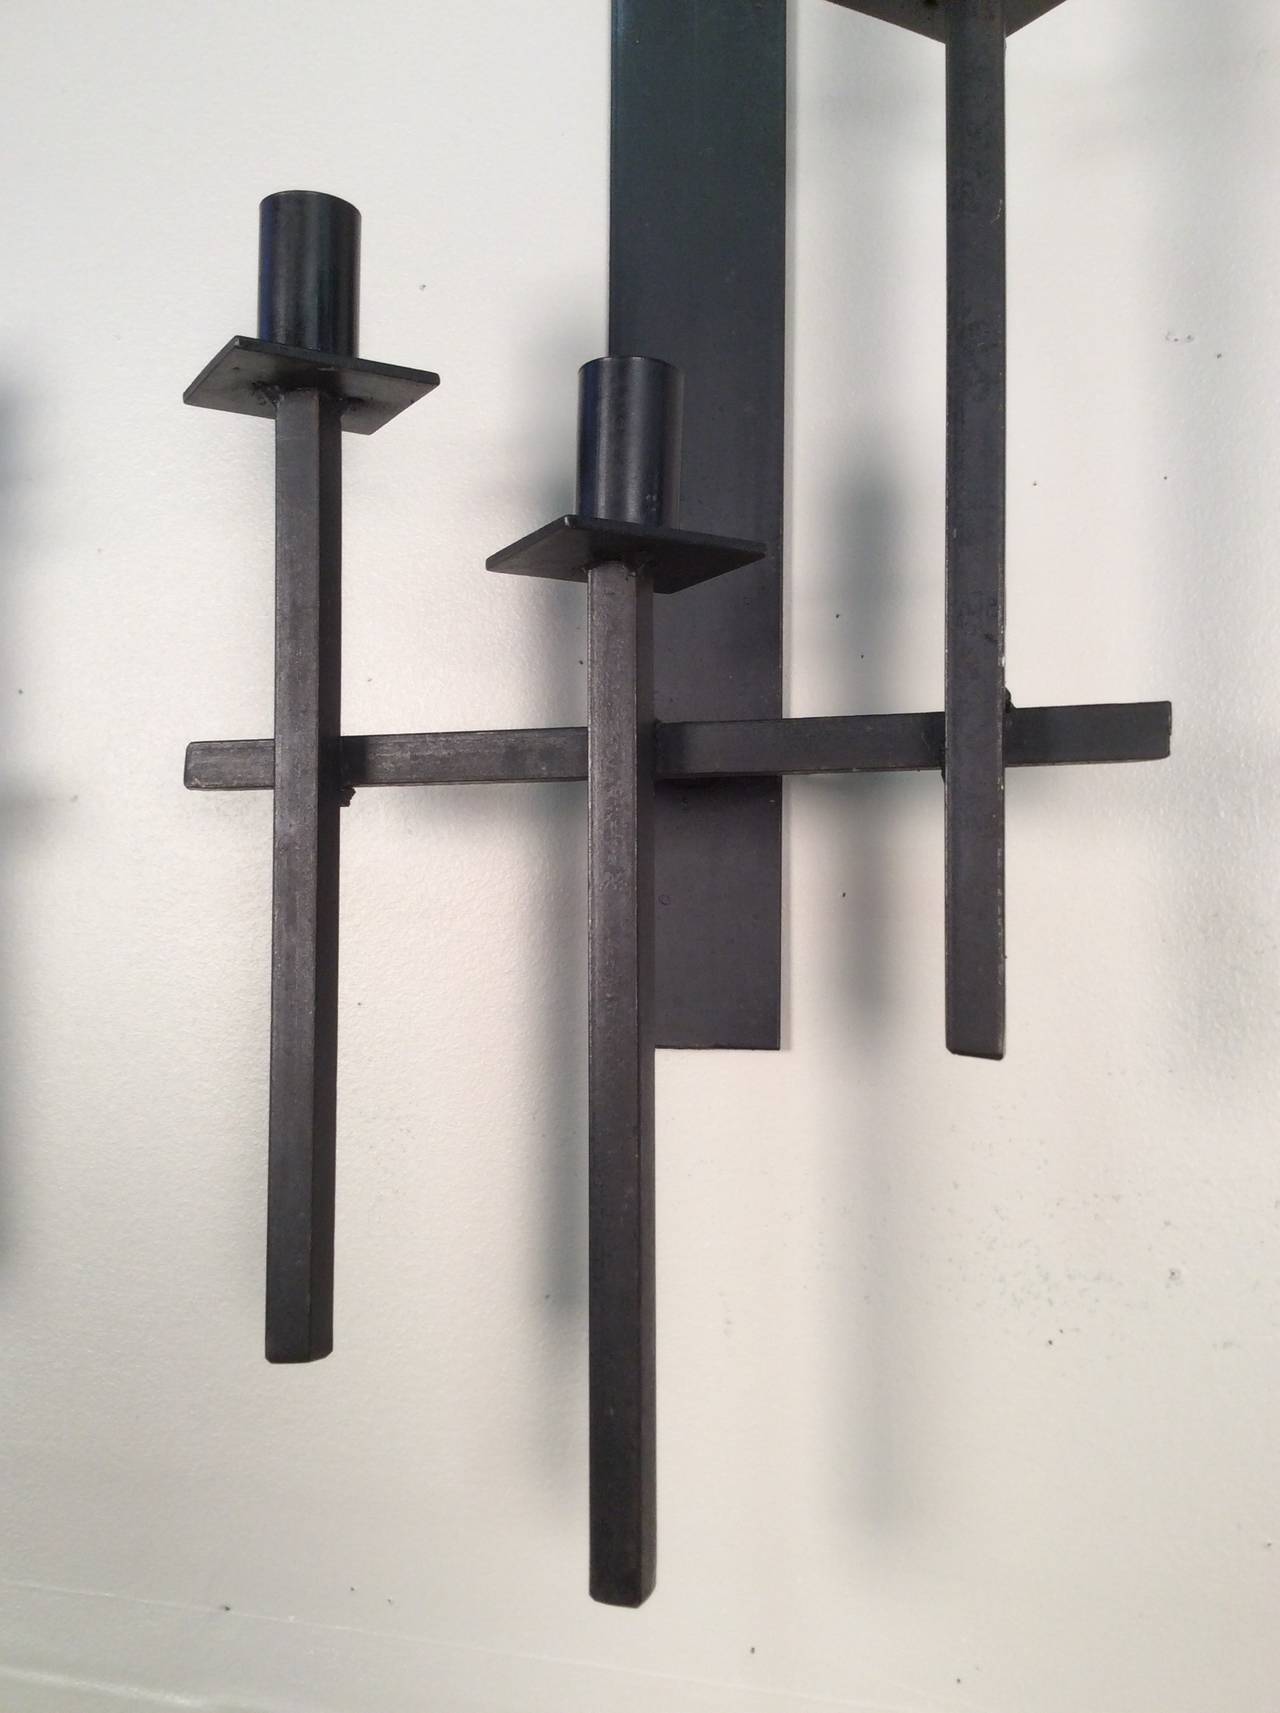 Welded Wrought Iron Sconces by California Moderists Van Keppel and Green, circa 1960